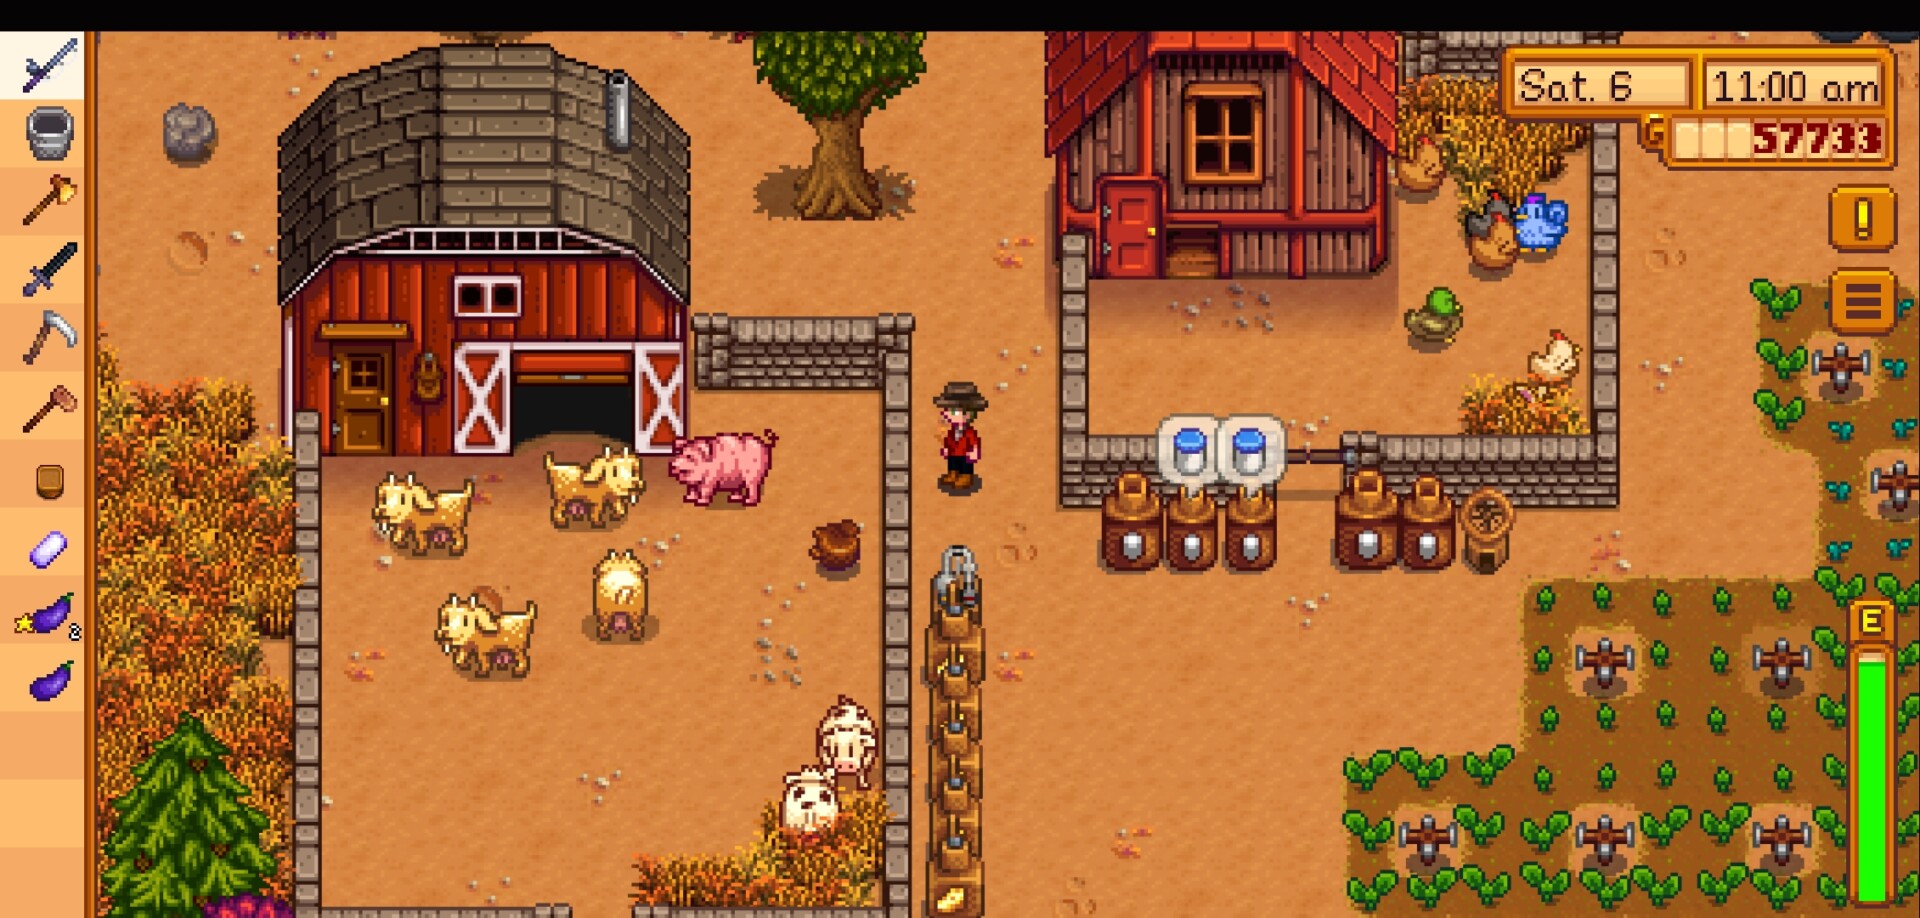 Stardew Valley review: Android farming sim is a breath of fresh air